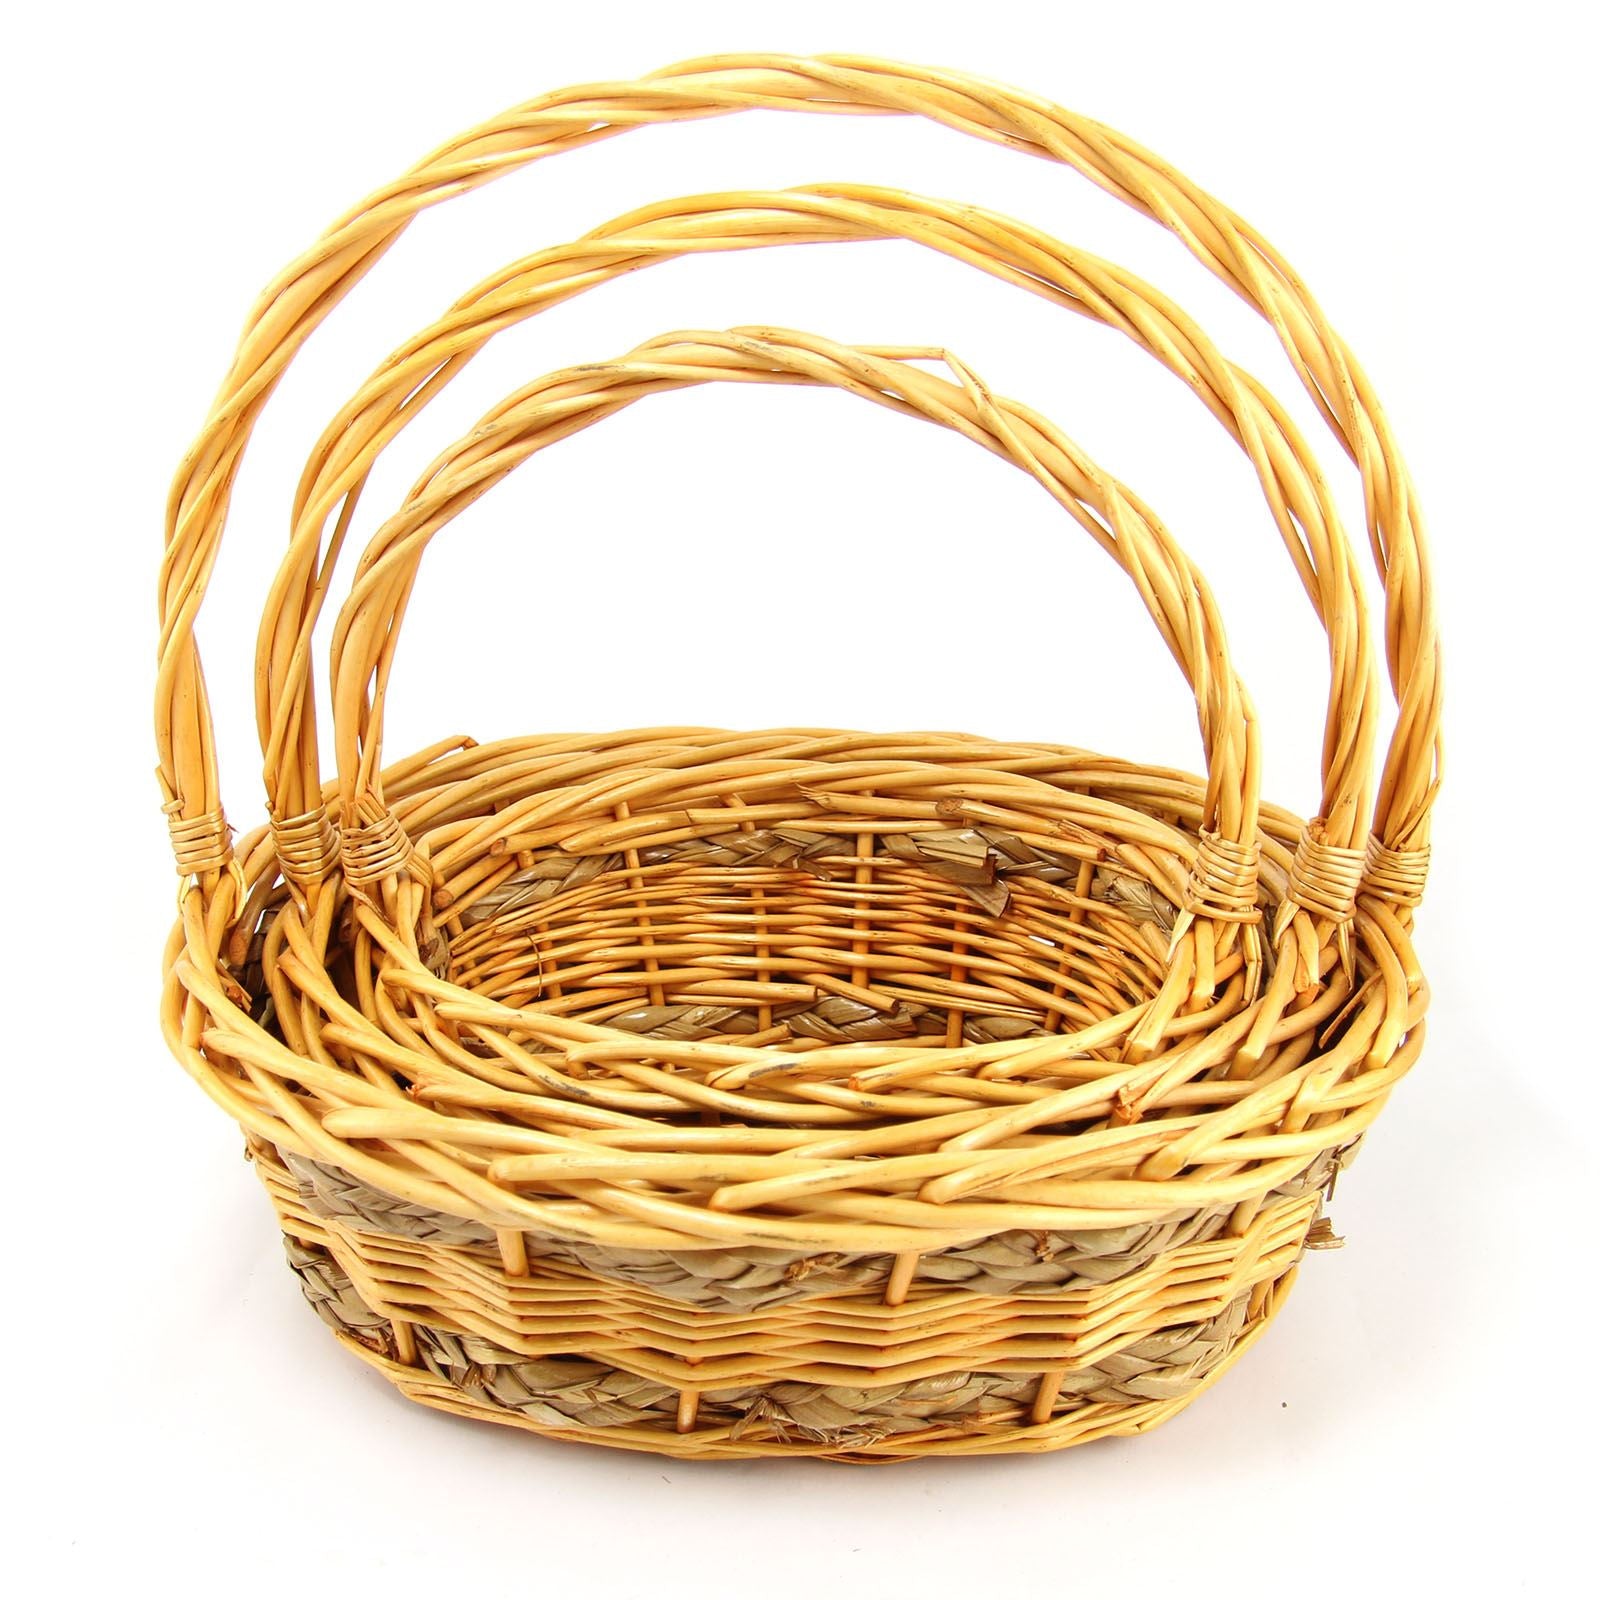 Chunky Tan Varnished Hamper Baskets! Moses Shopping Wicker